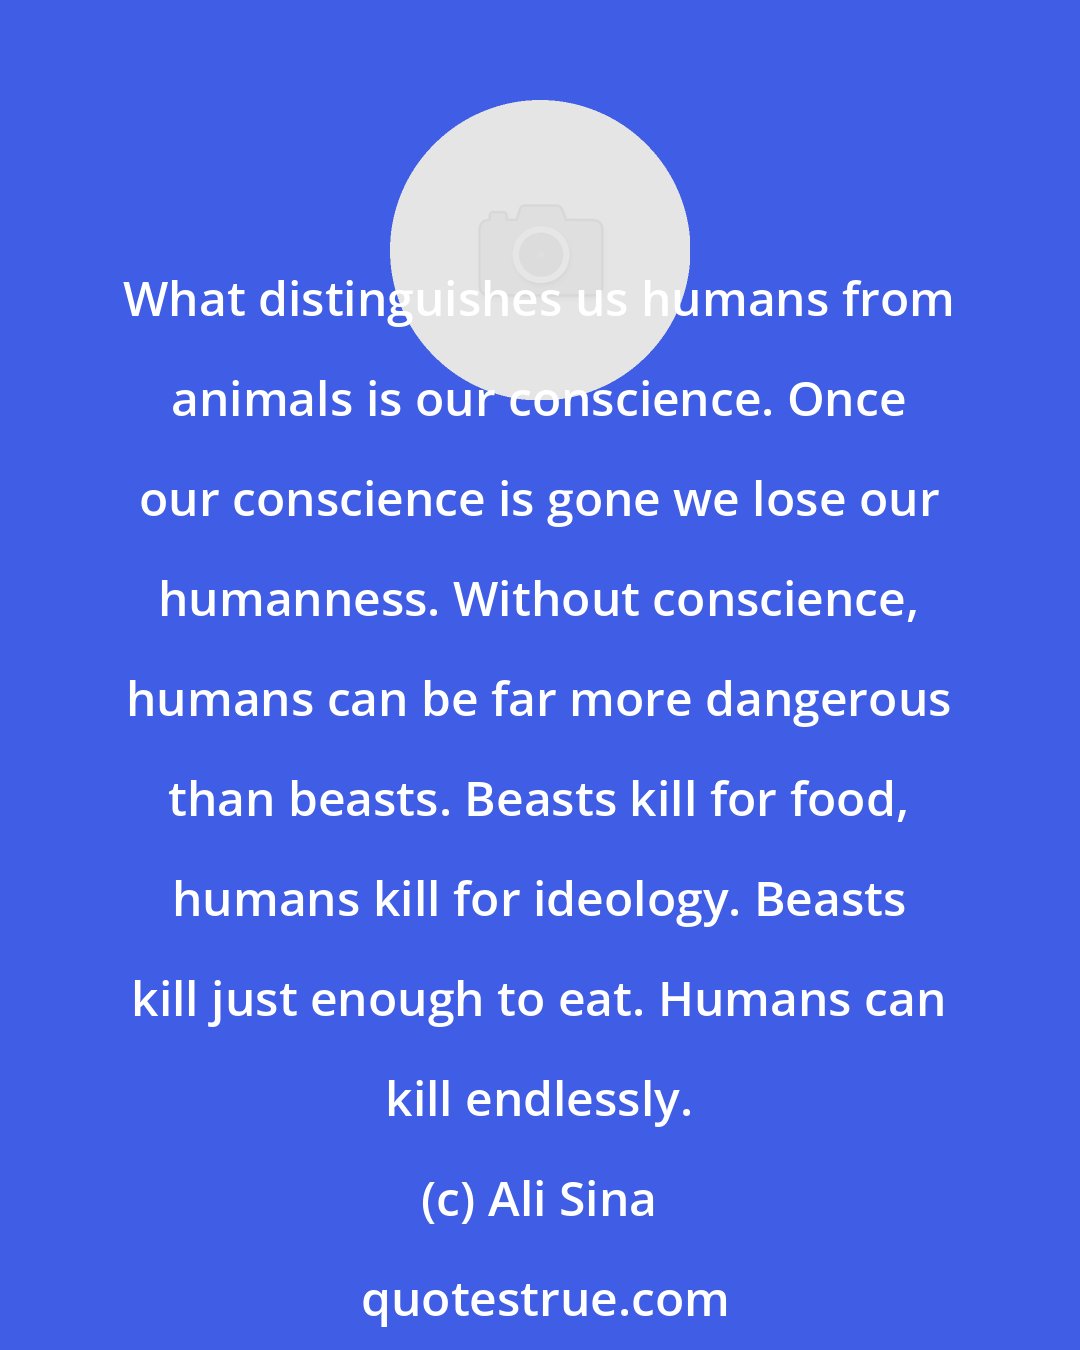 Ali Sina: What distinguishes us humans from animals is our conscience. Once our conscience is gone we lose our humanness. Without conscience, humans can be far more dangerous than beasts. Beasts kill for food, humans kill for ideology. Beasts kill just enough to eat. Humans can kill endlessly.